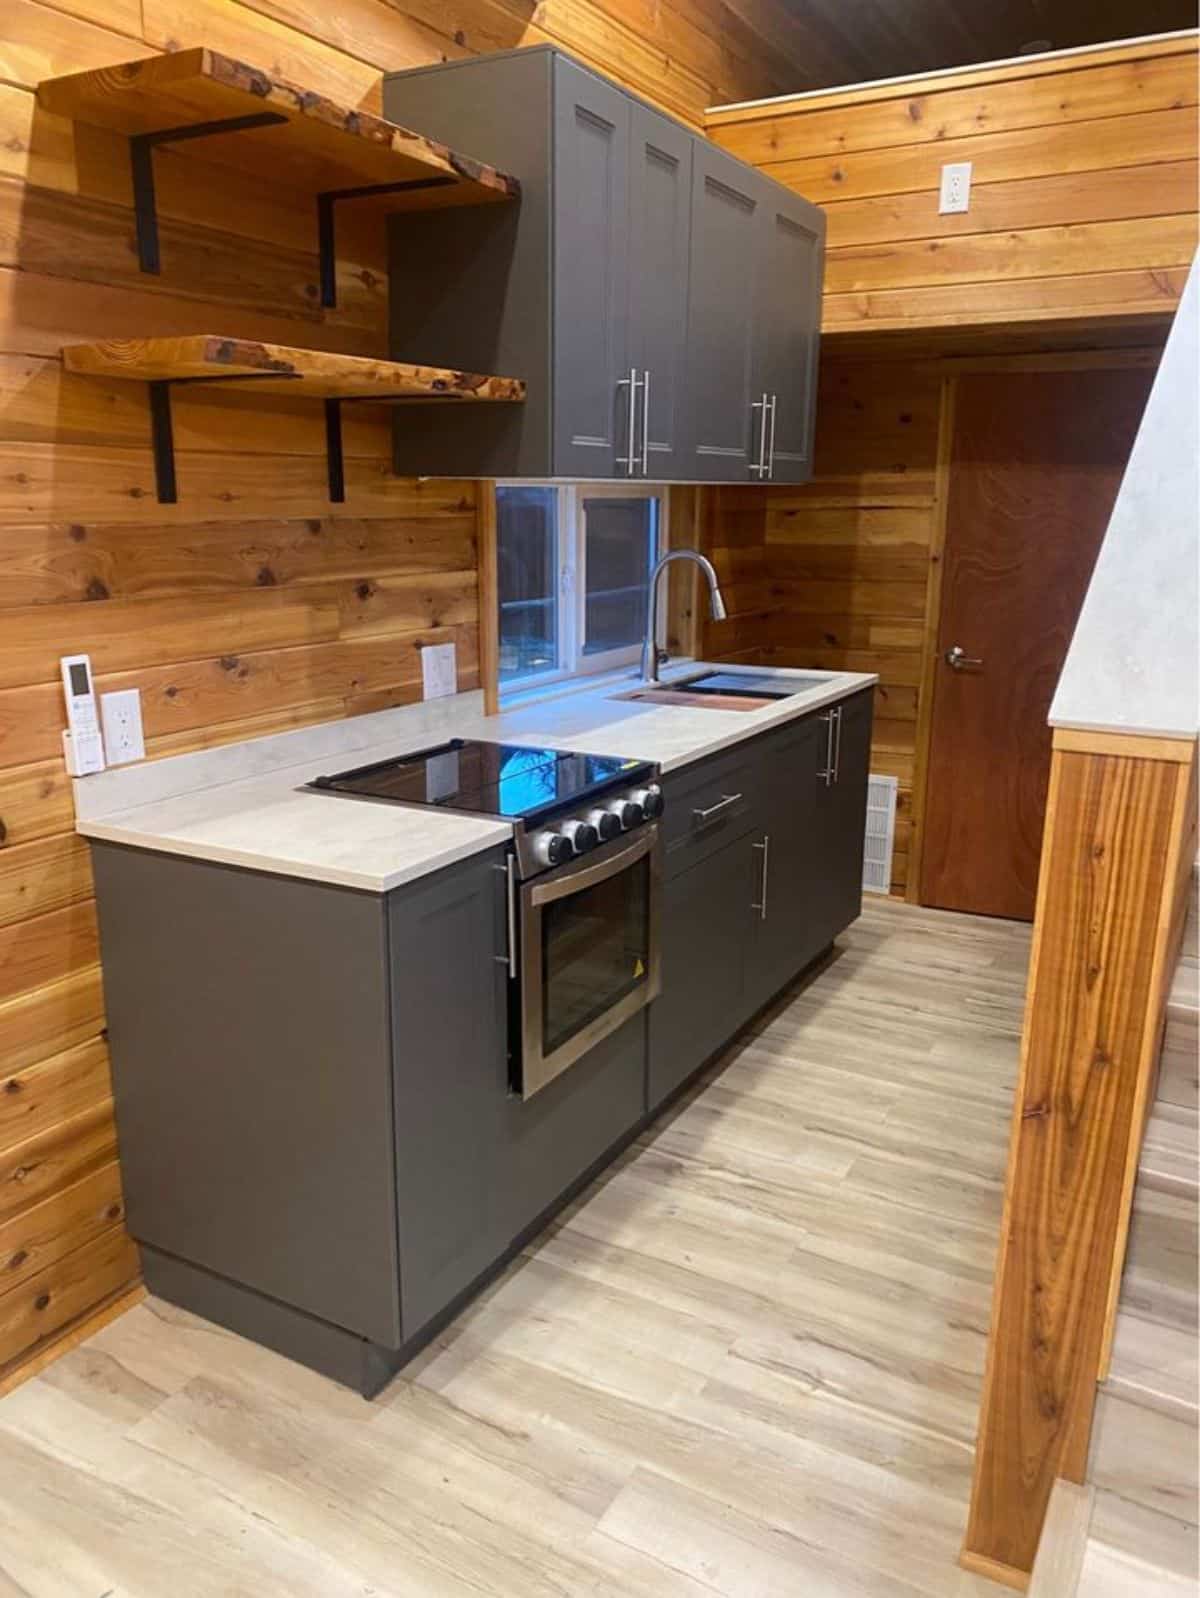 stunning and well organized kitchen area of double lofted tiny home